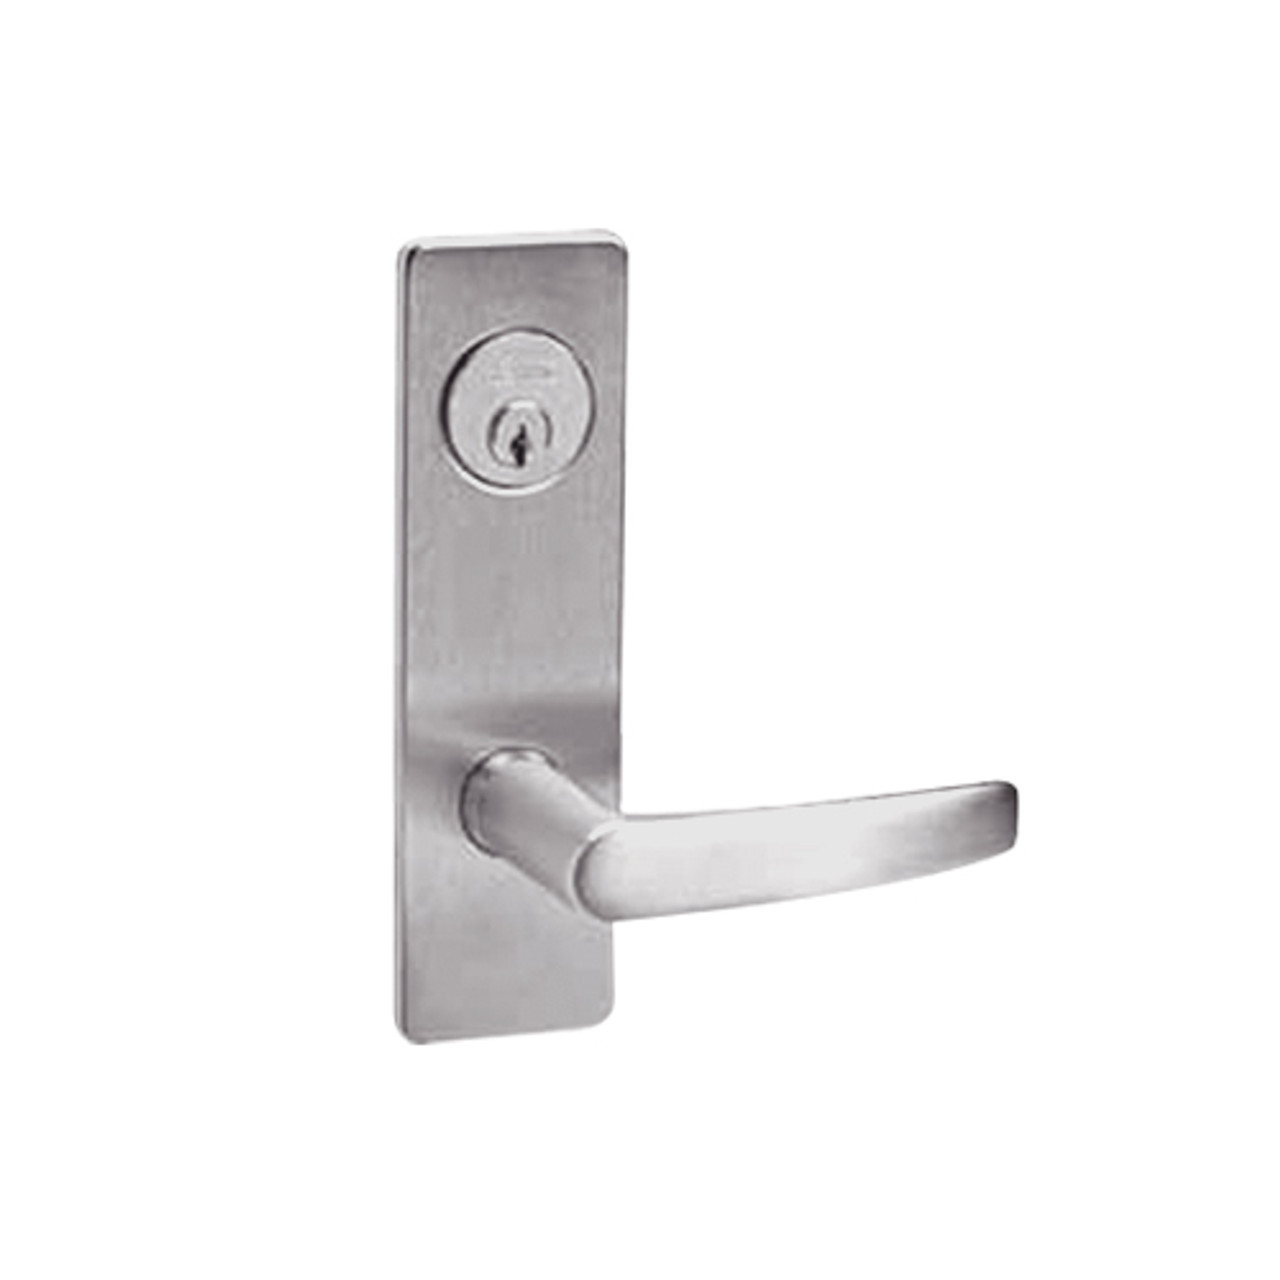 ML2065-ASR-630 Corbin Russwin ML2000 Series Mortise Dormitory Locksets with Armstrong Lever and Deadbolt in Satin Stainless